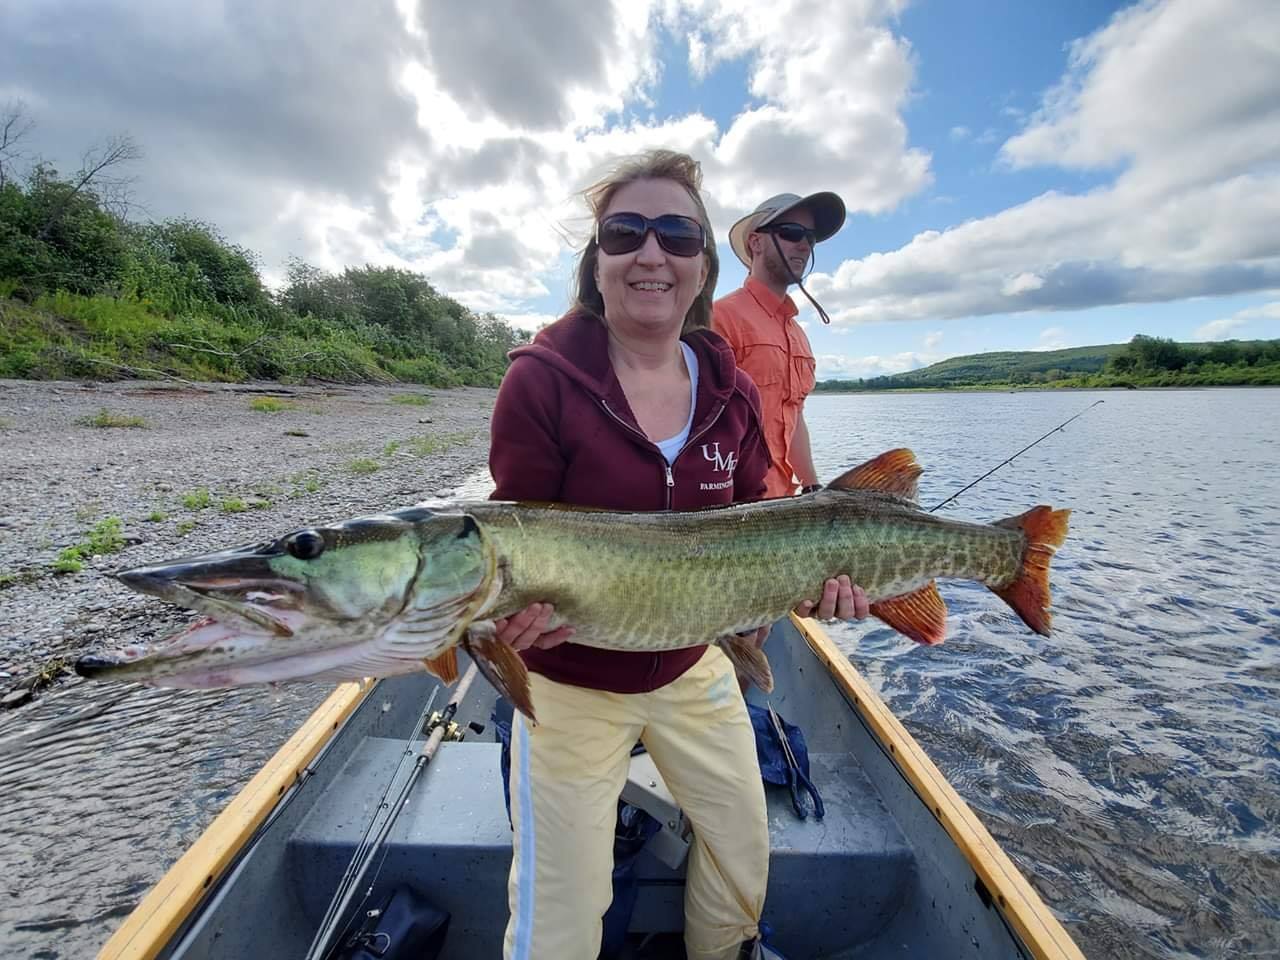 World class muskie fishing takes place all year long, but the International Muskie Derby takes place each summer.